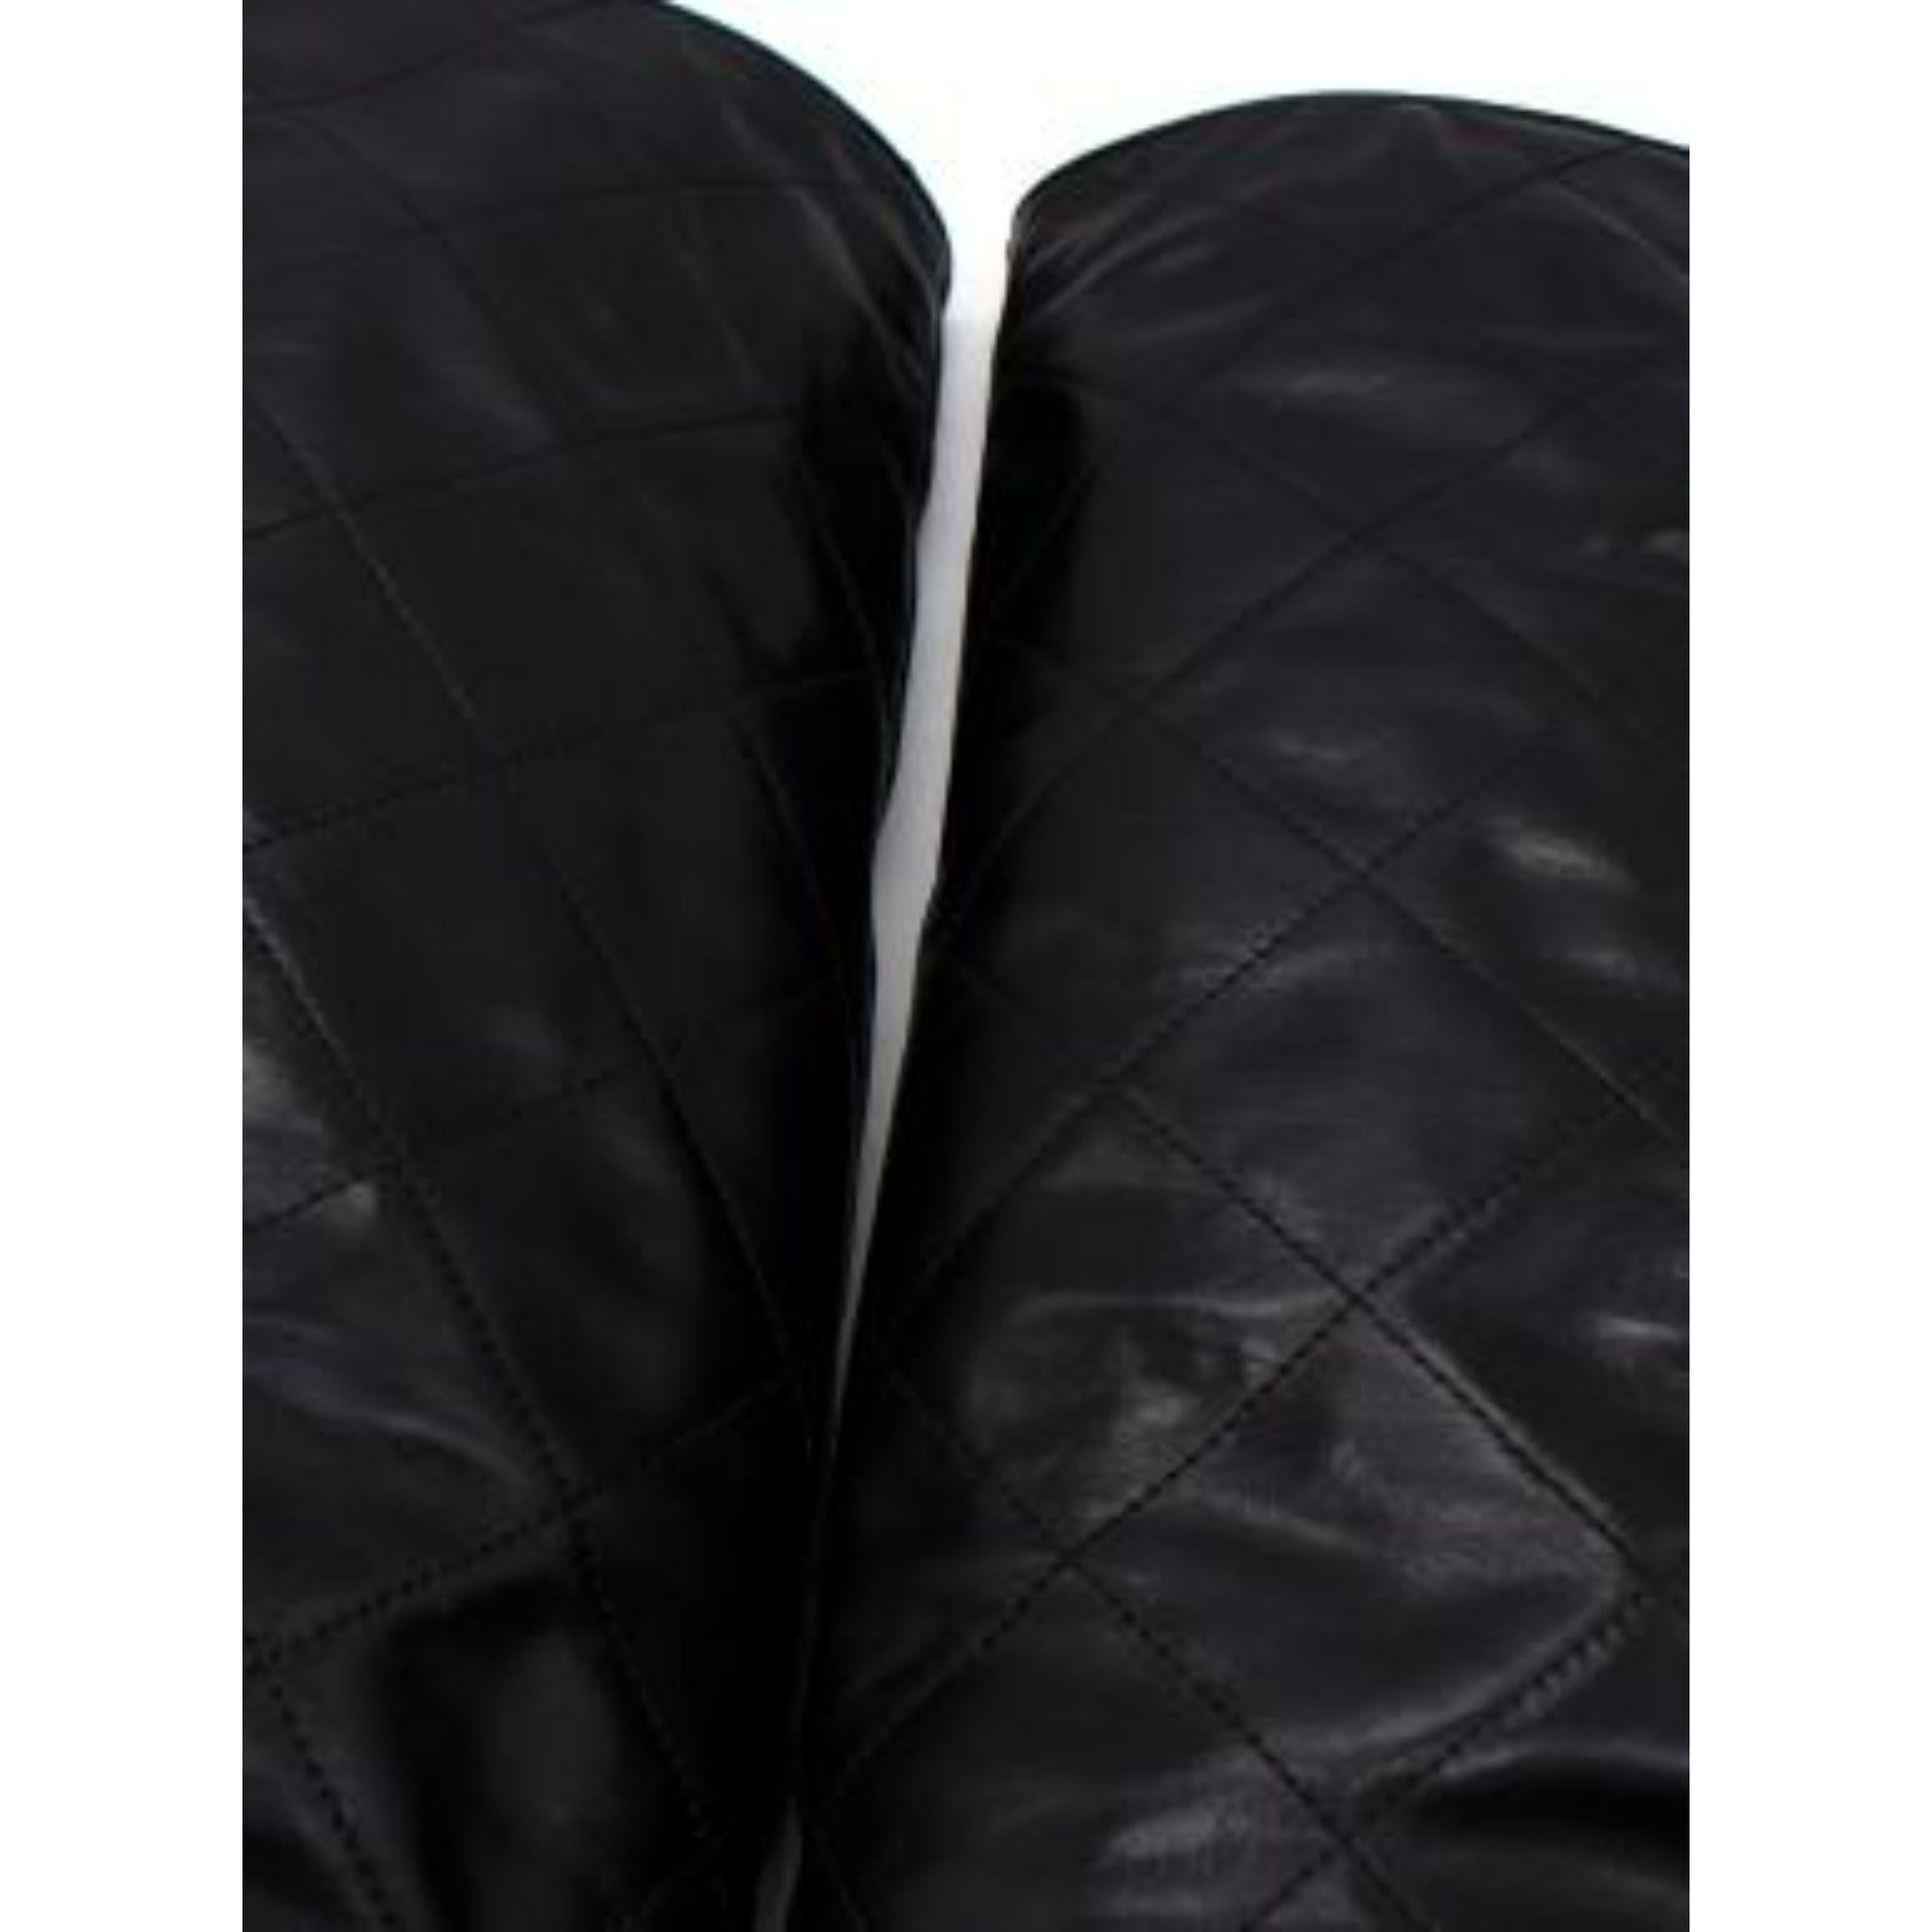 Chanel Black Quilted Leather Knee-high Boots For Sale 5